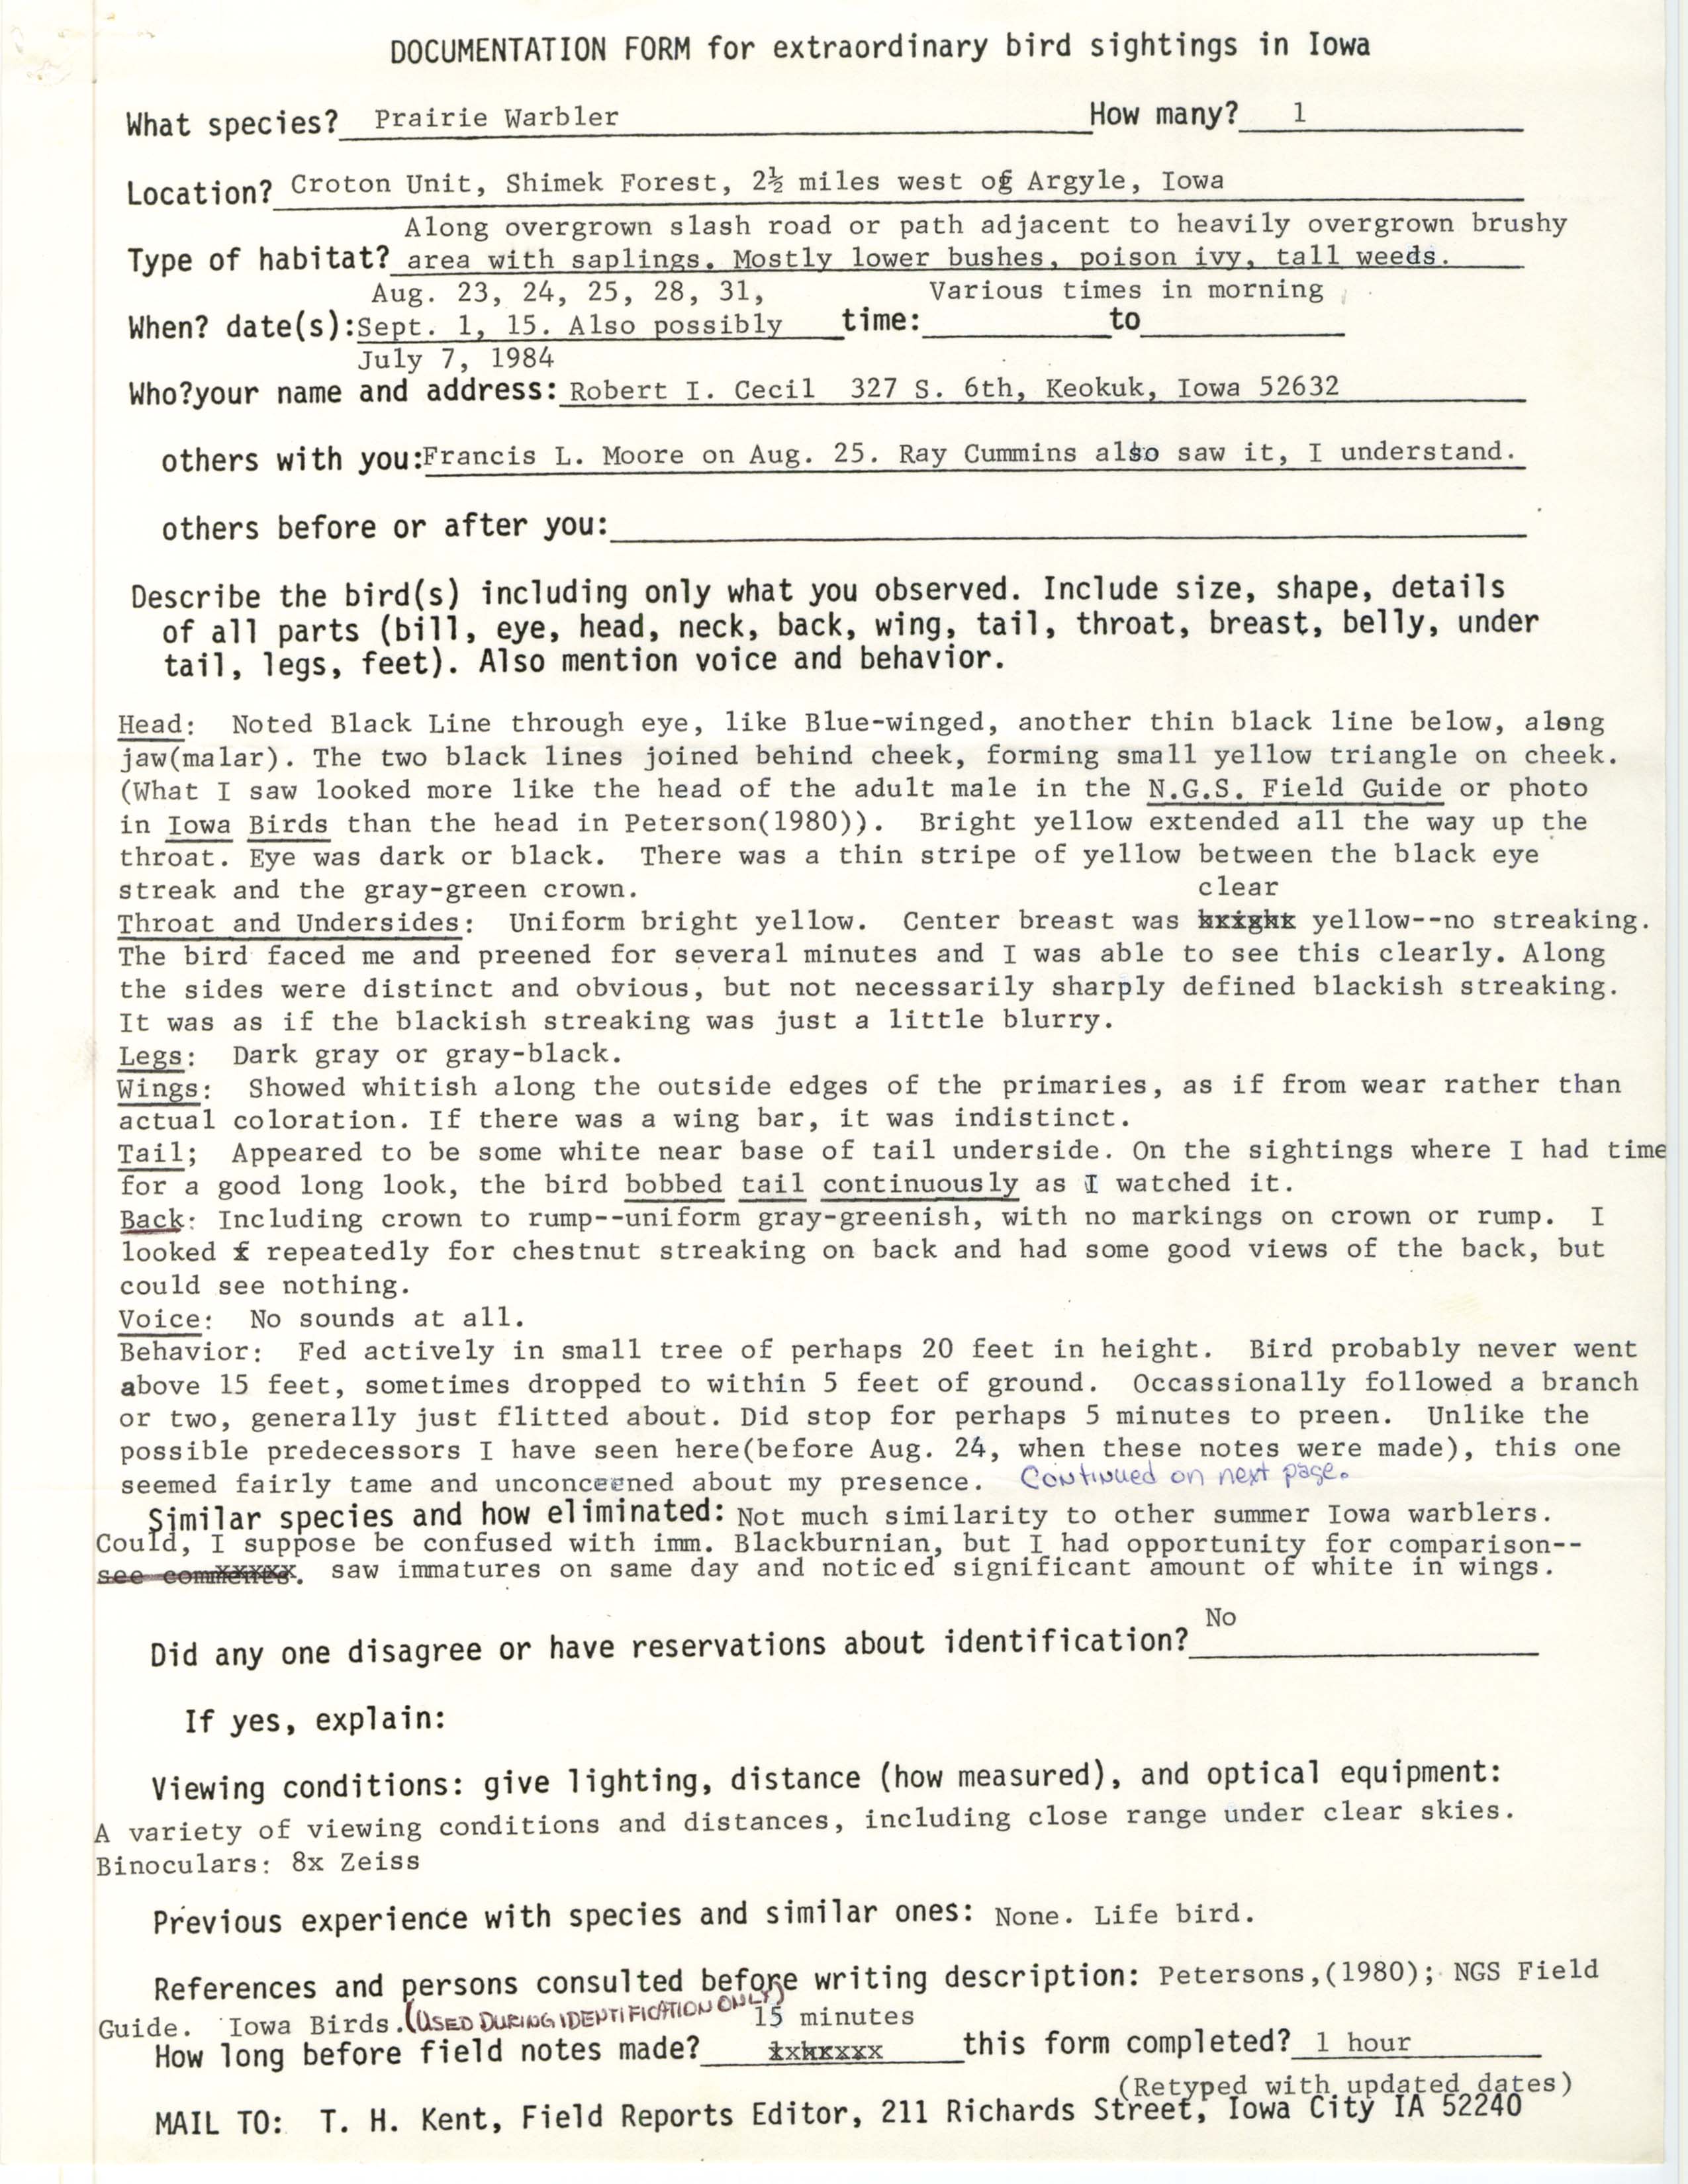 Rare bird documentation form for Prairie Warbler at the Croton Unit in Shimek State Forest in 1984